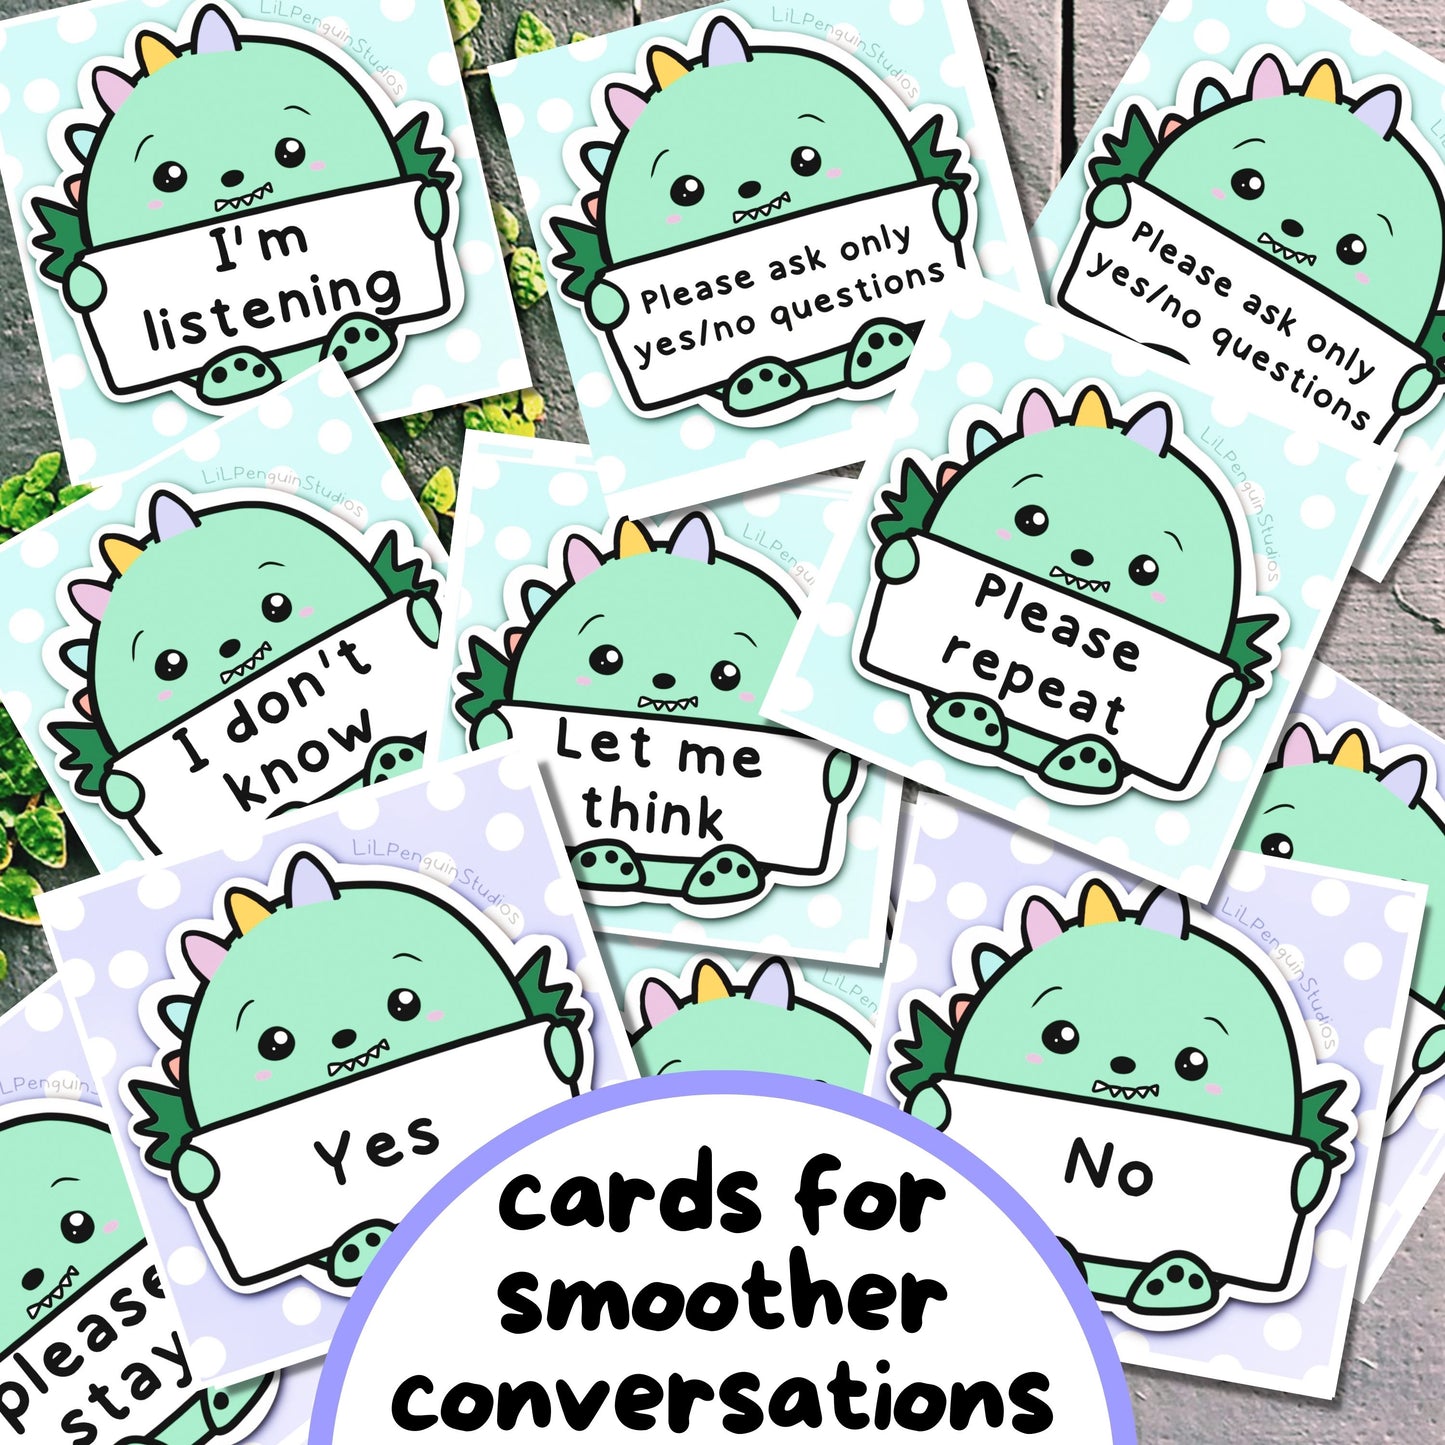 48+48 Communication Cards (Digital) ft. Kex, the Dinosaur - Personal Use